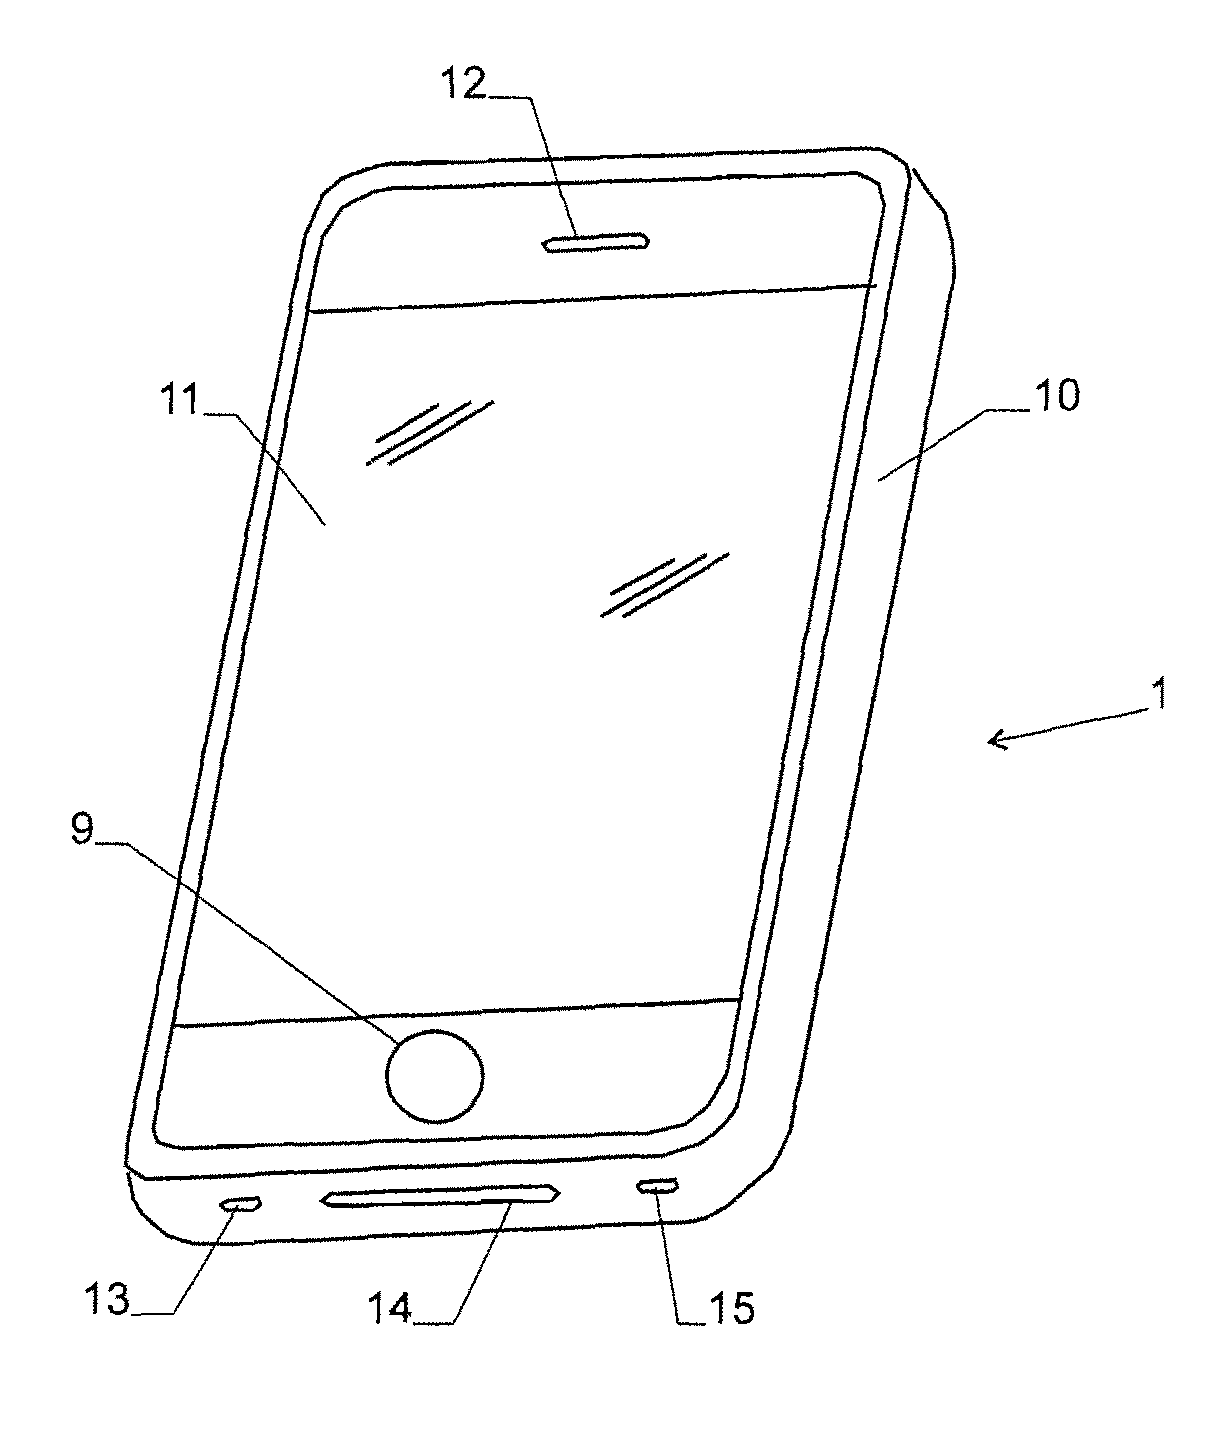 Portable sensor device with a gas sensor and low-power mode